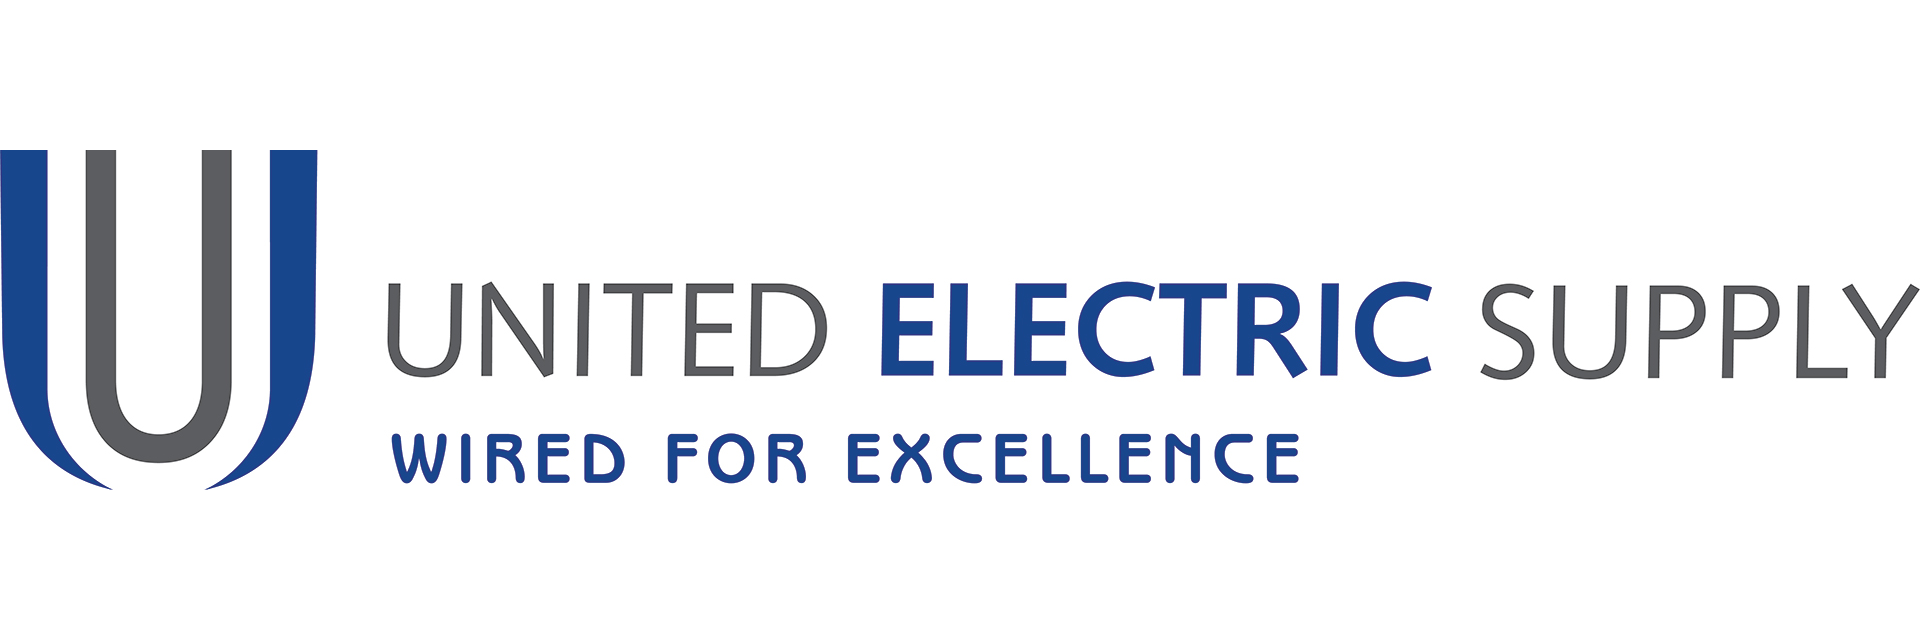 United Electric Supply Co. Inc.